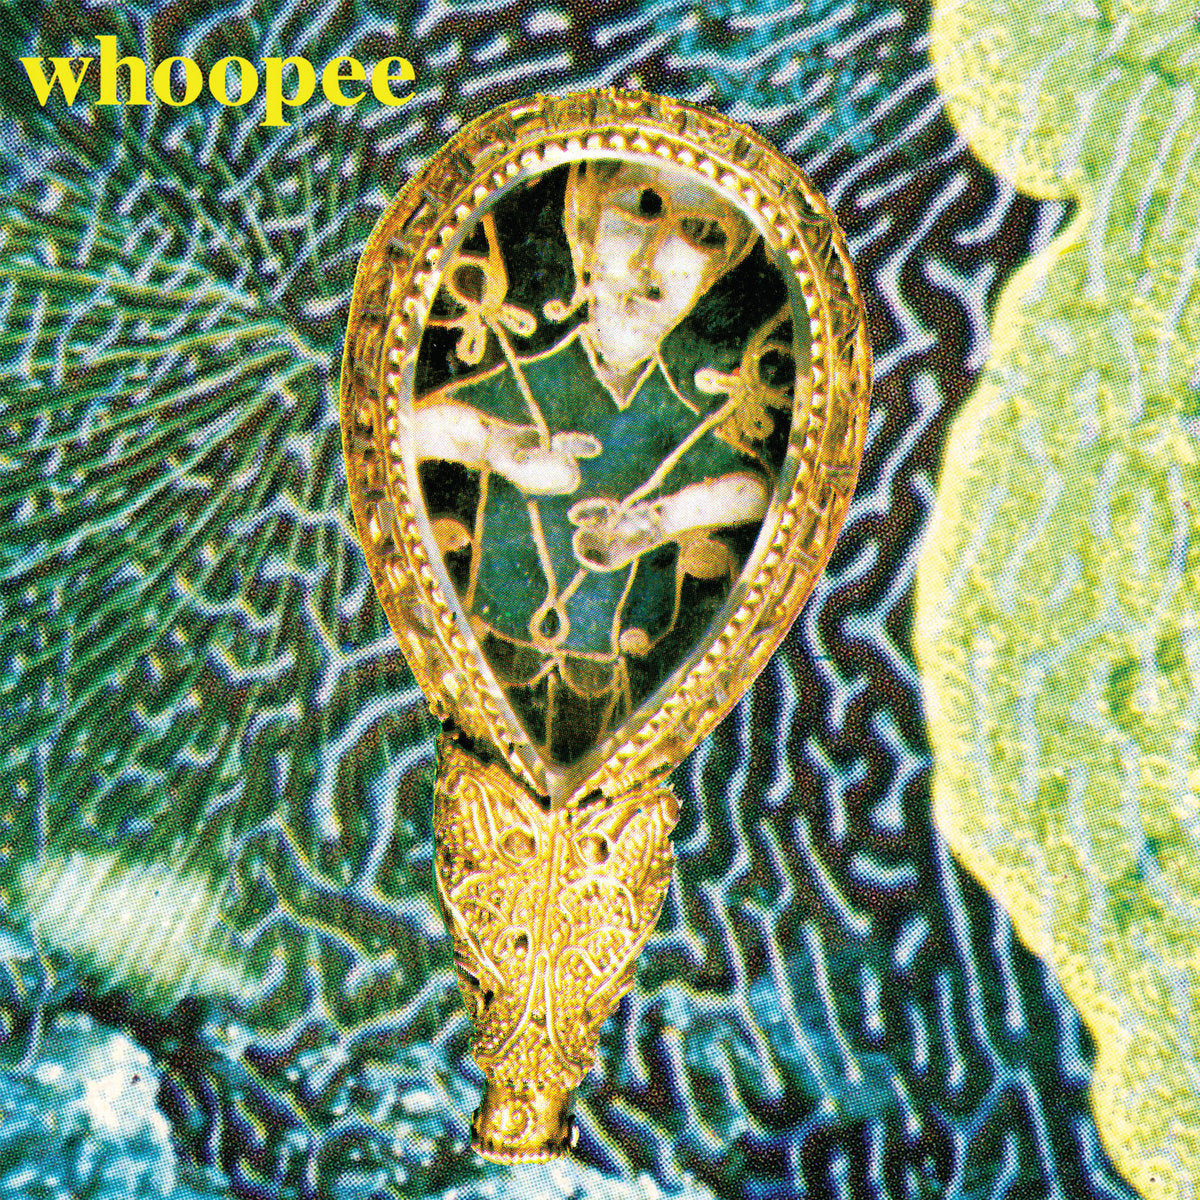 J. MCFARLANE'S REALITY GUEST - "WHOOPEE" LP (PRE-ORDER)